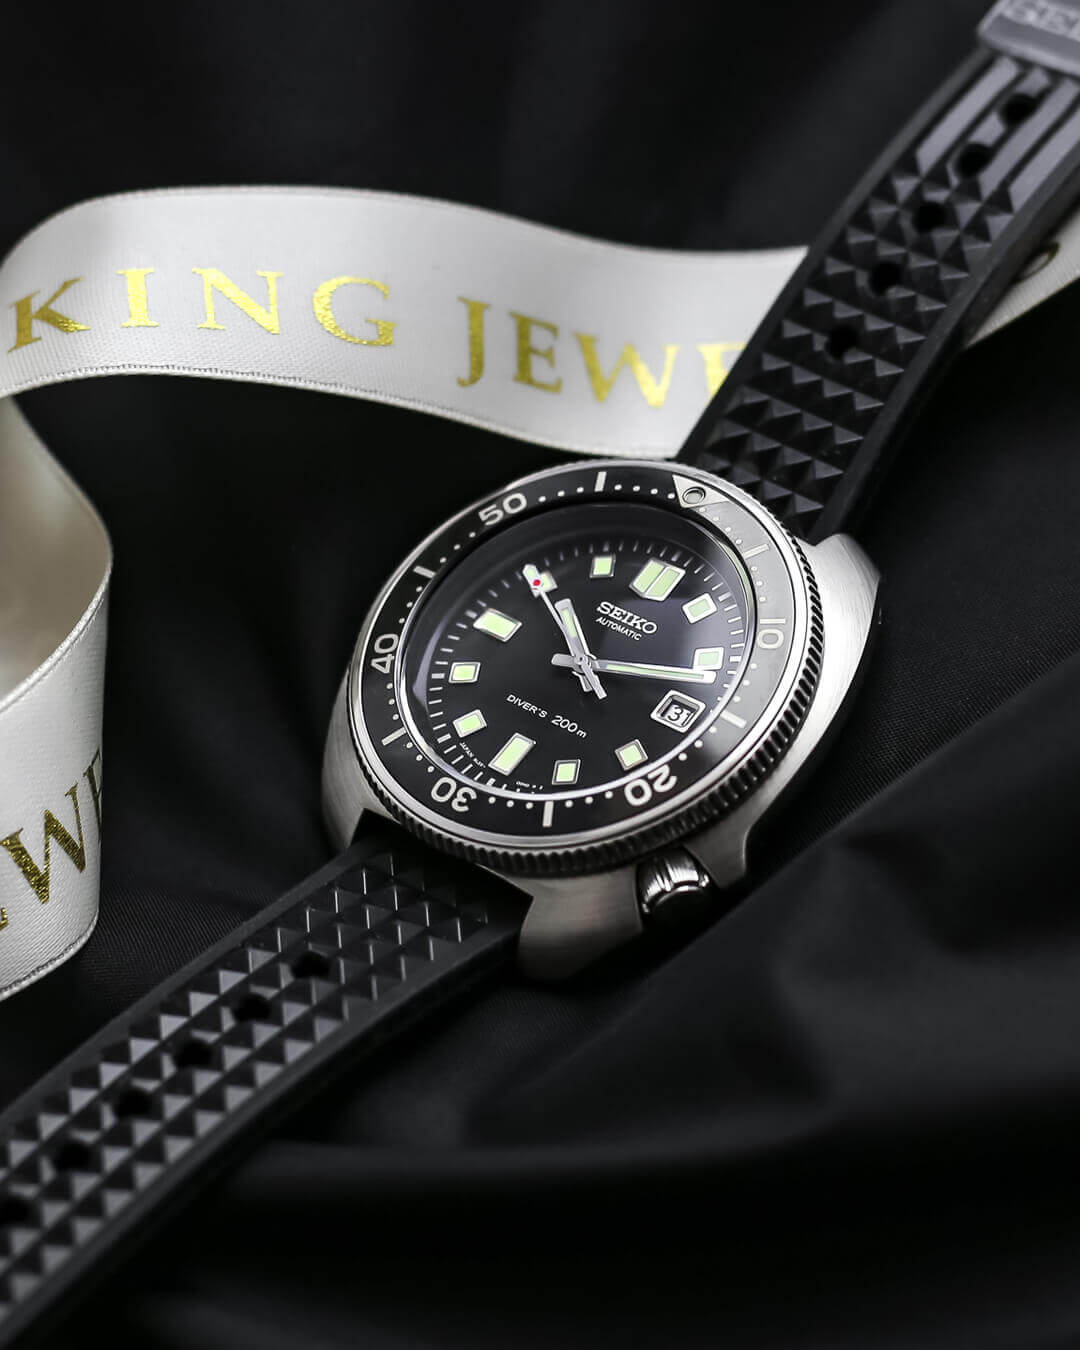 New Watch Arrival: Seiko Prospex 1970 Diver's Re-Creation SLA033 - King  Jewelers | Jewelry Store Nashville